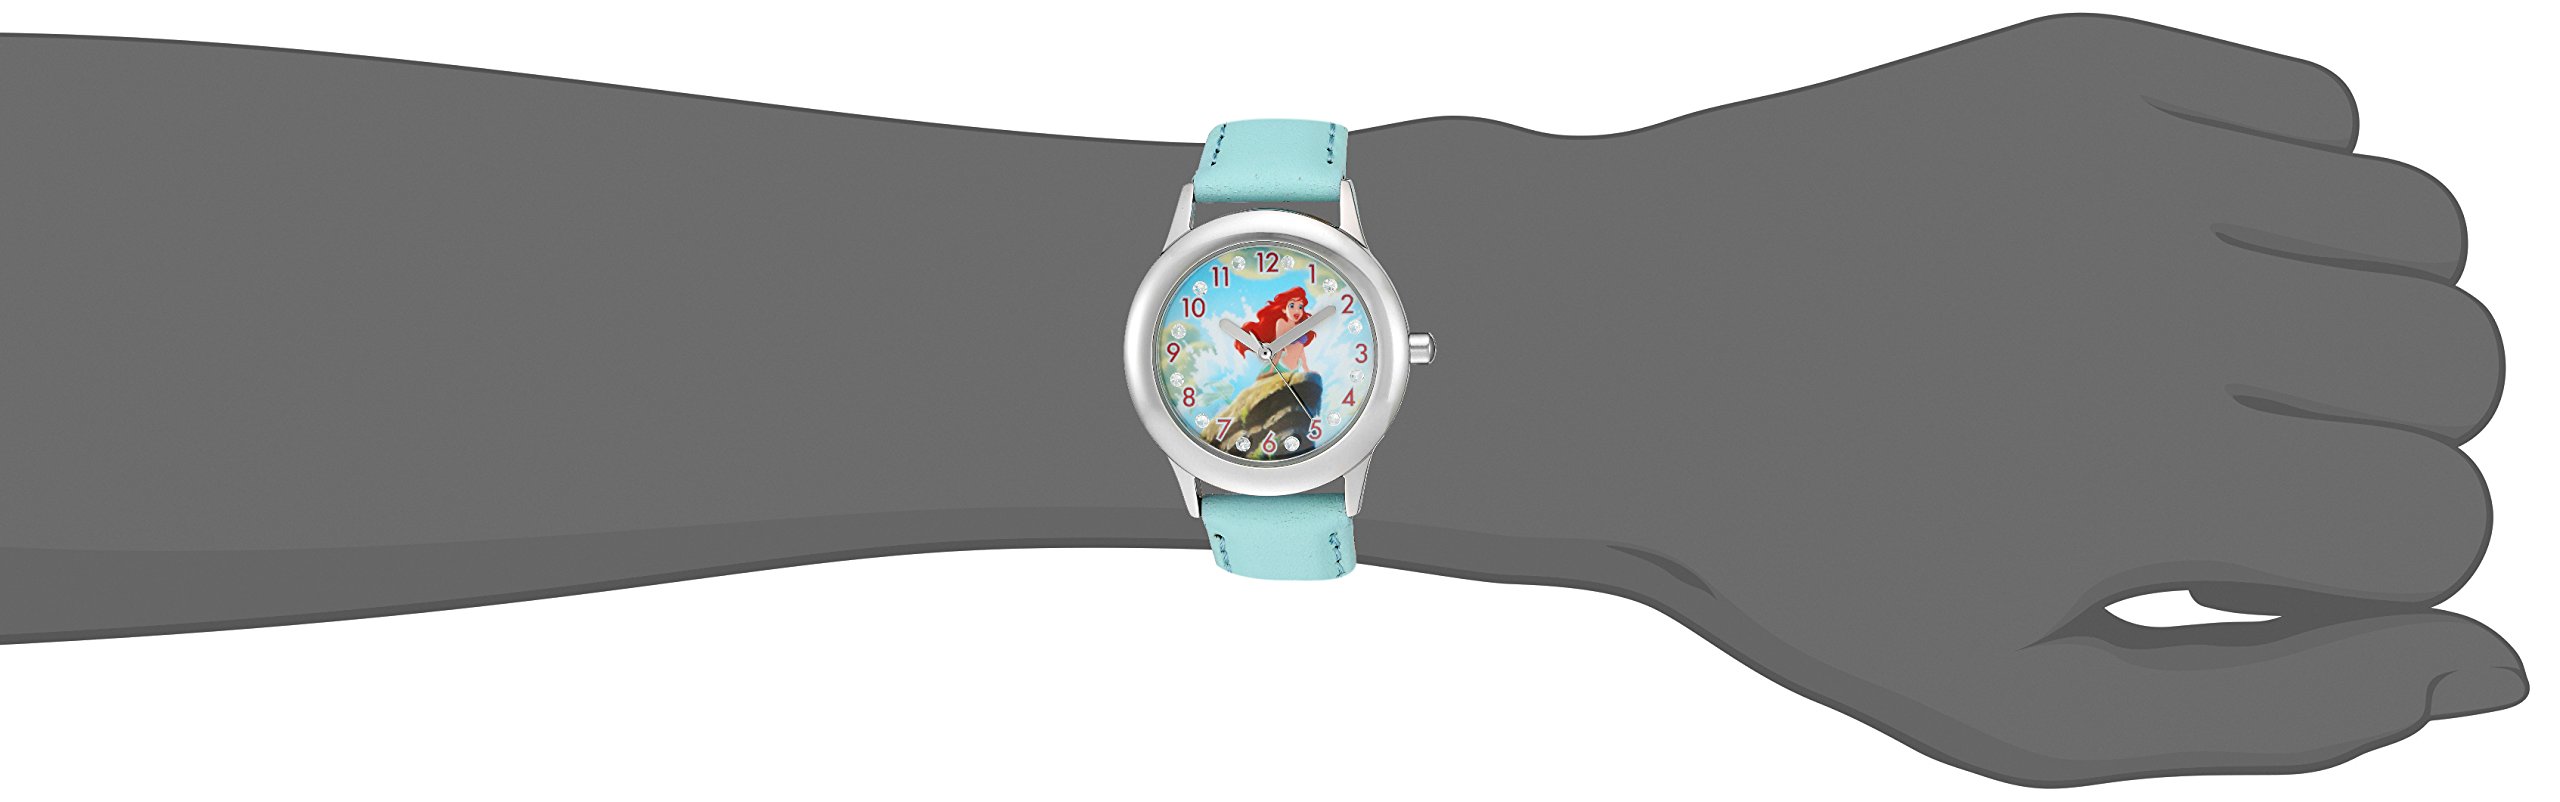 Disney Girl's 'Ariel' Quartz Stainless Steel and Leather Watch, Color:Blue (Model: W002916)